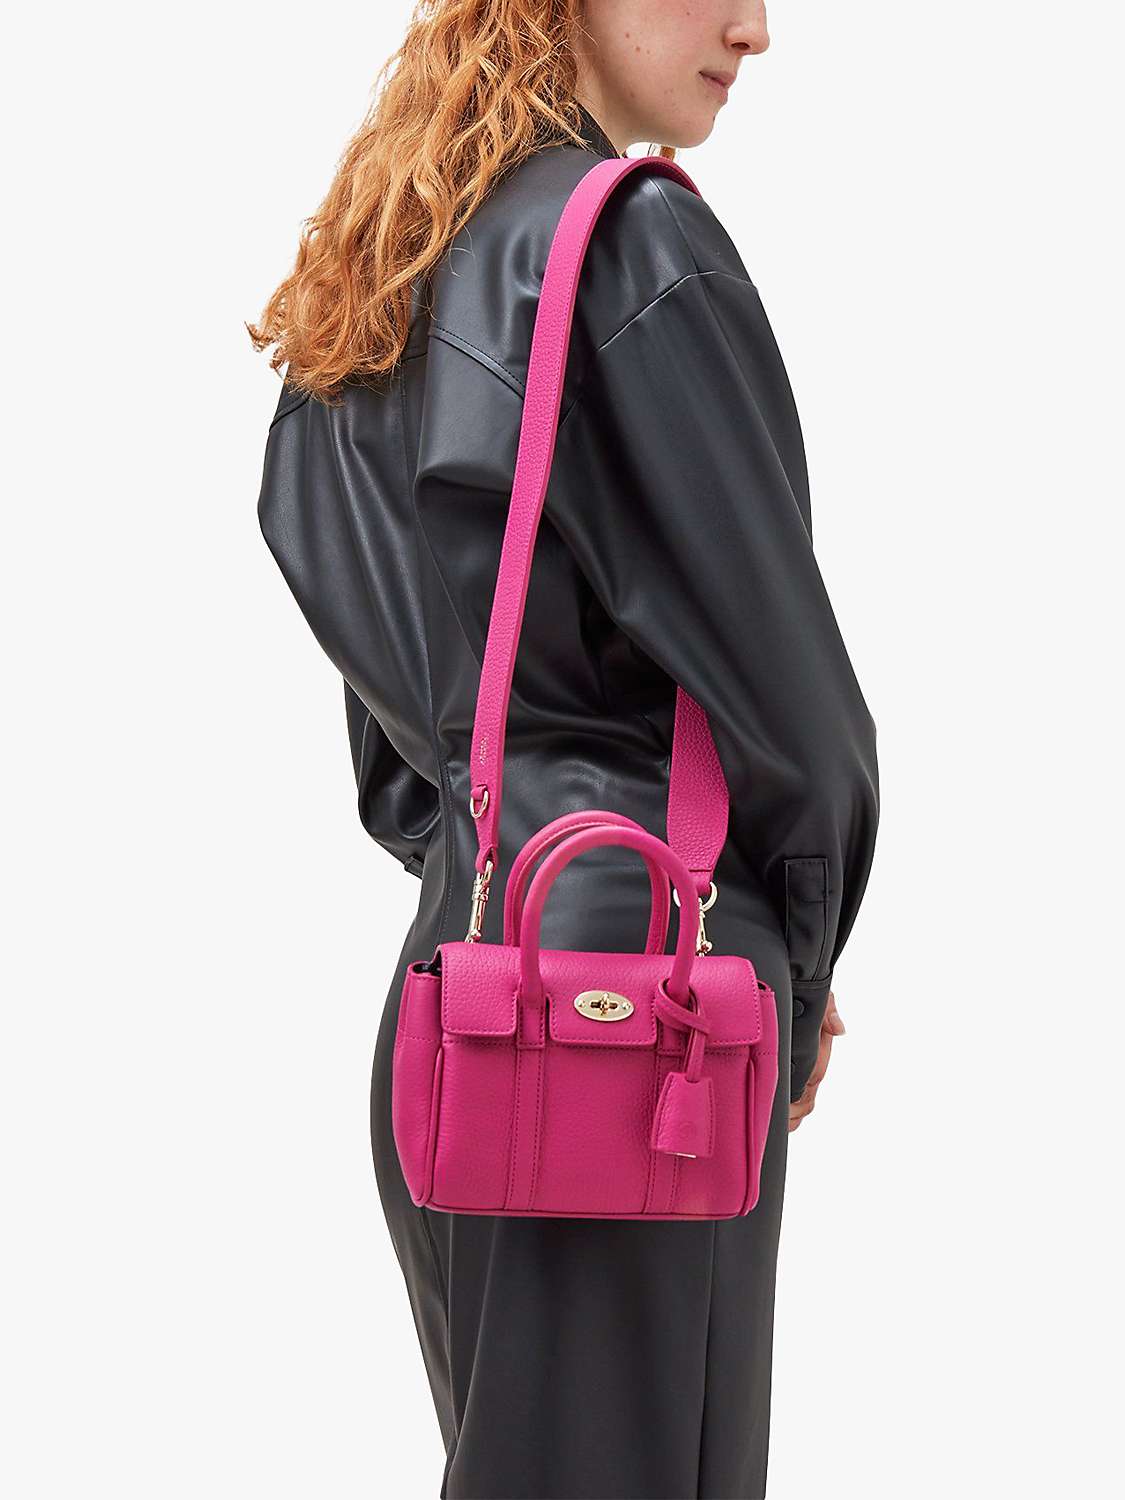 Buy Mulberry Mini Bayswater Heavy Grain Leather Tote Bag Online at johnlewis.com